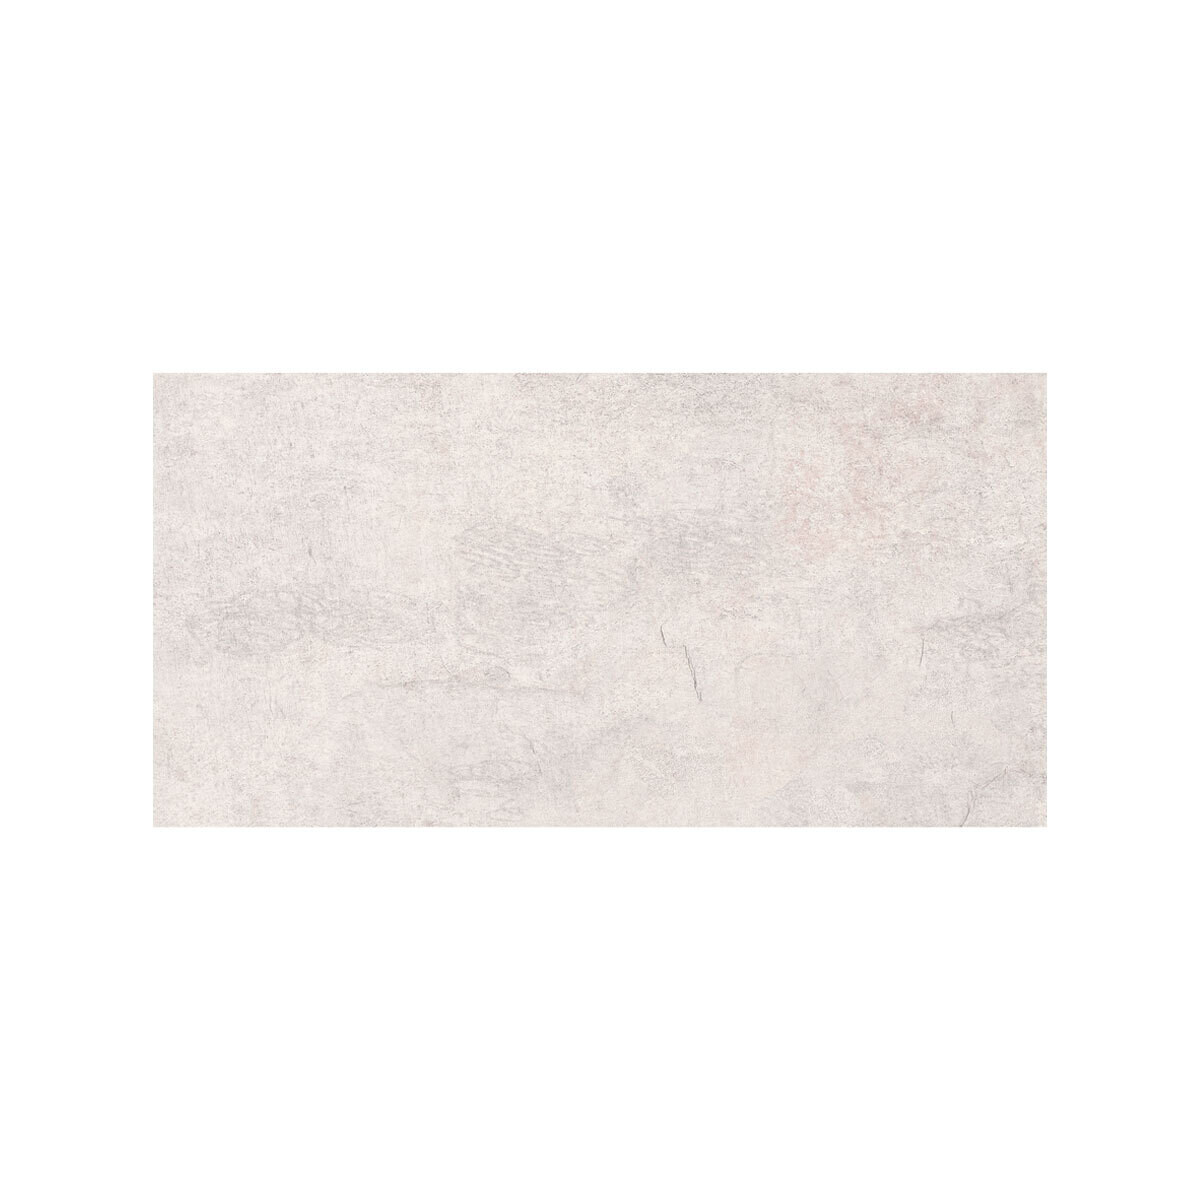 PISO PARED AMADEO BEIGE 30X60